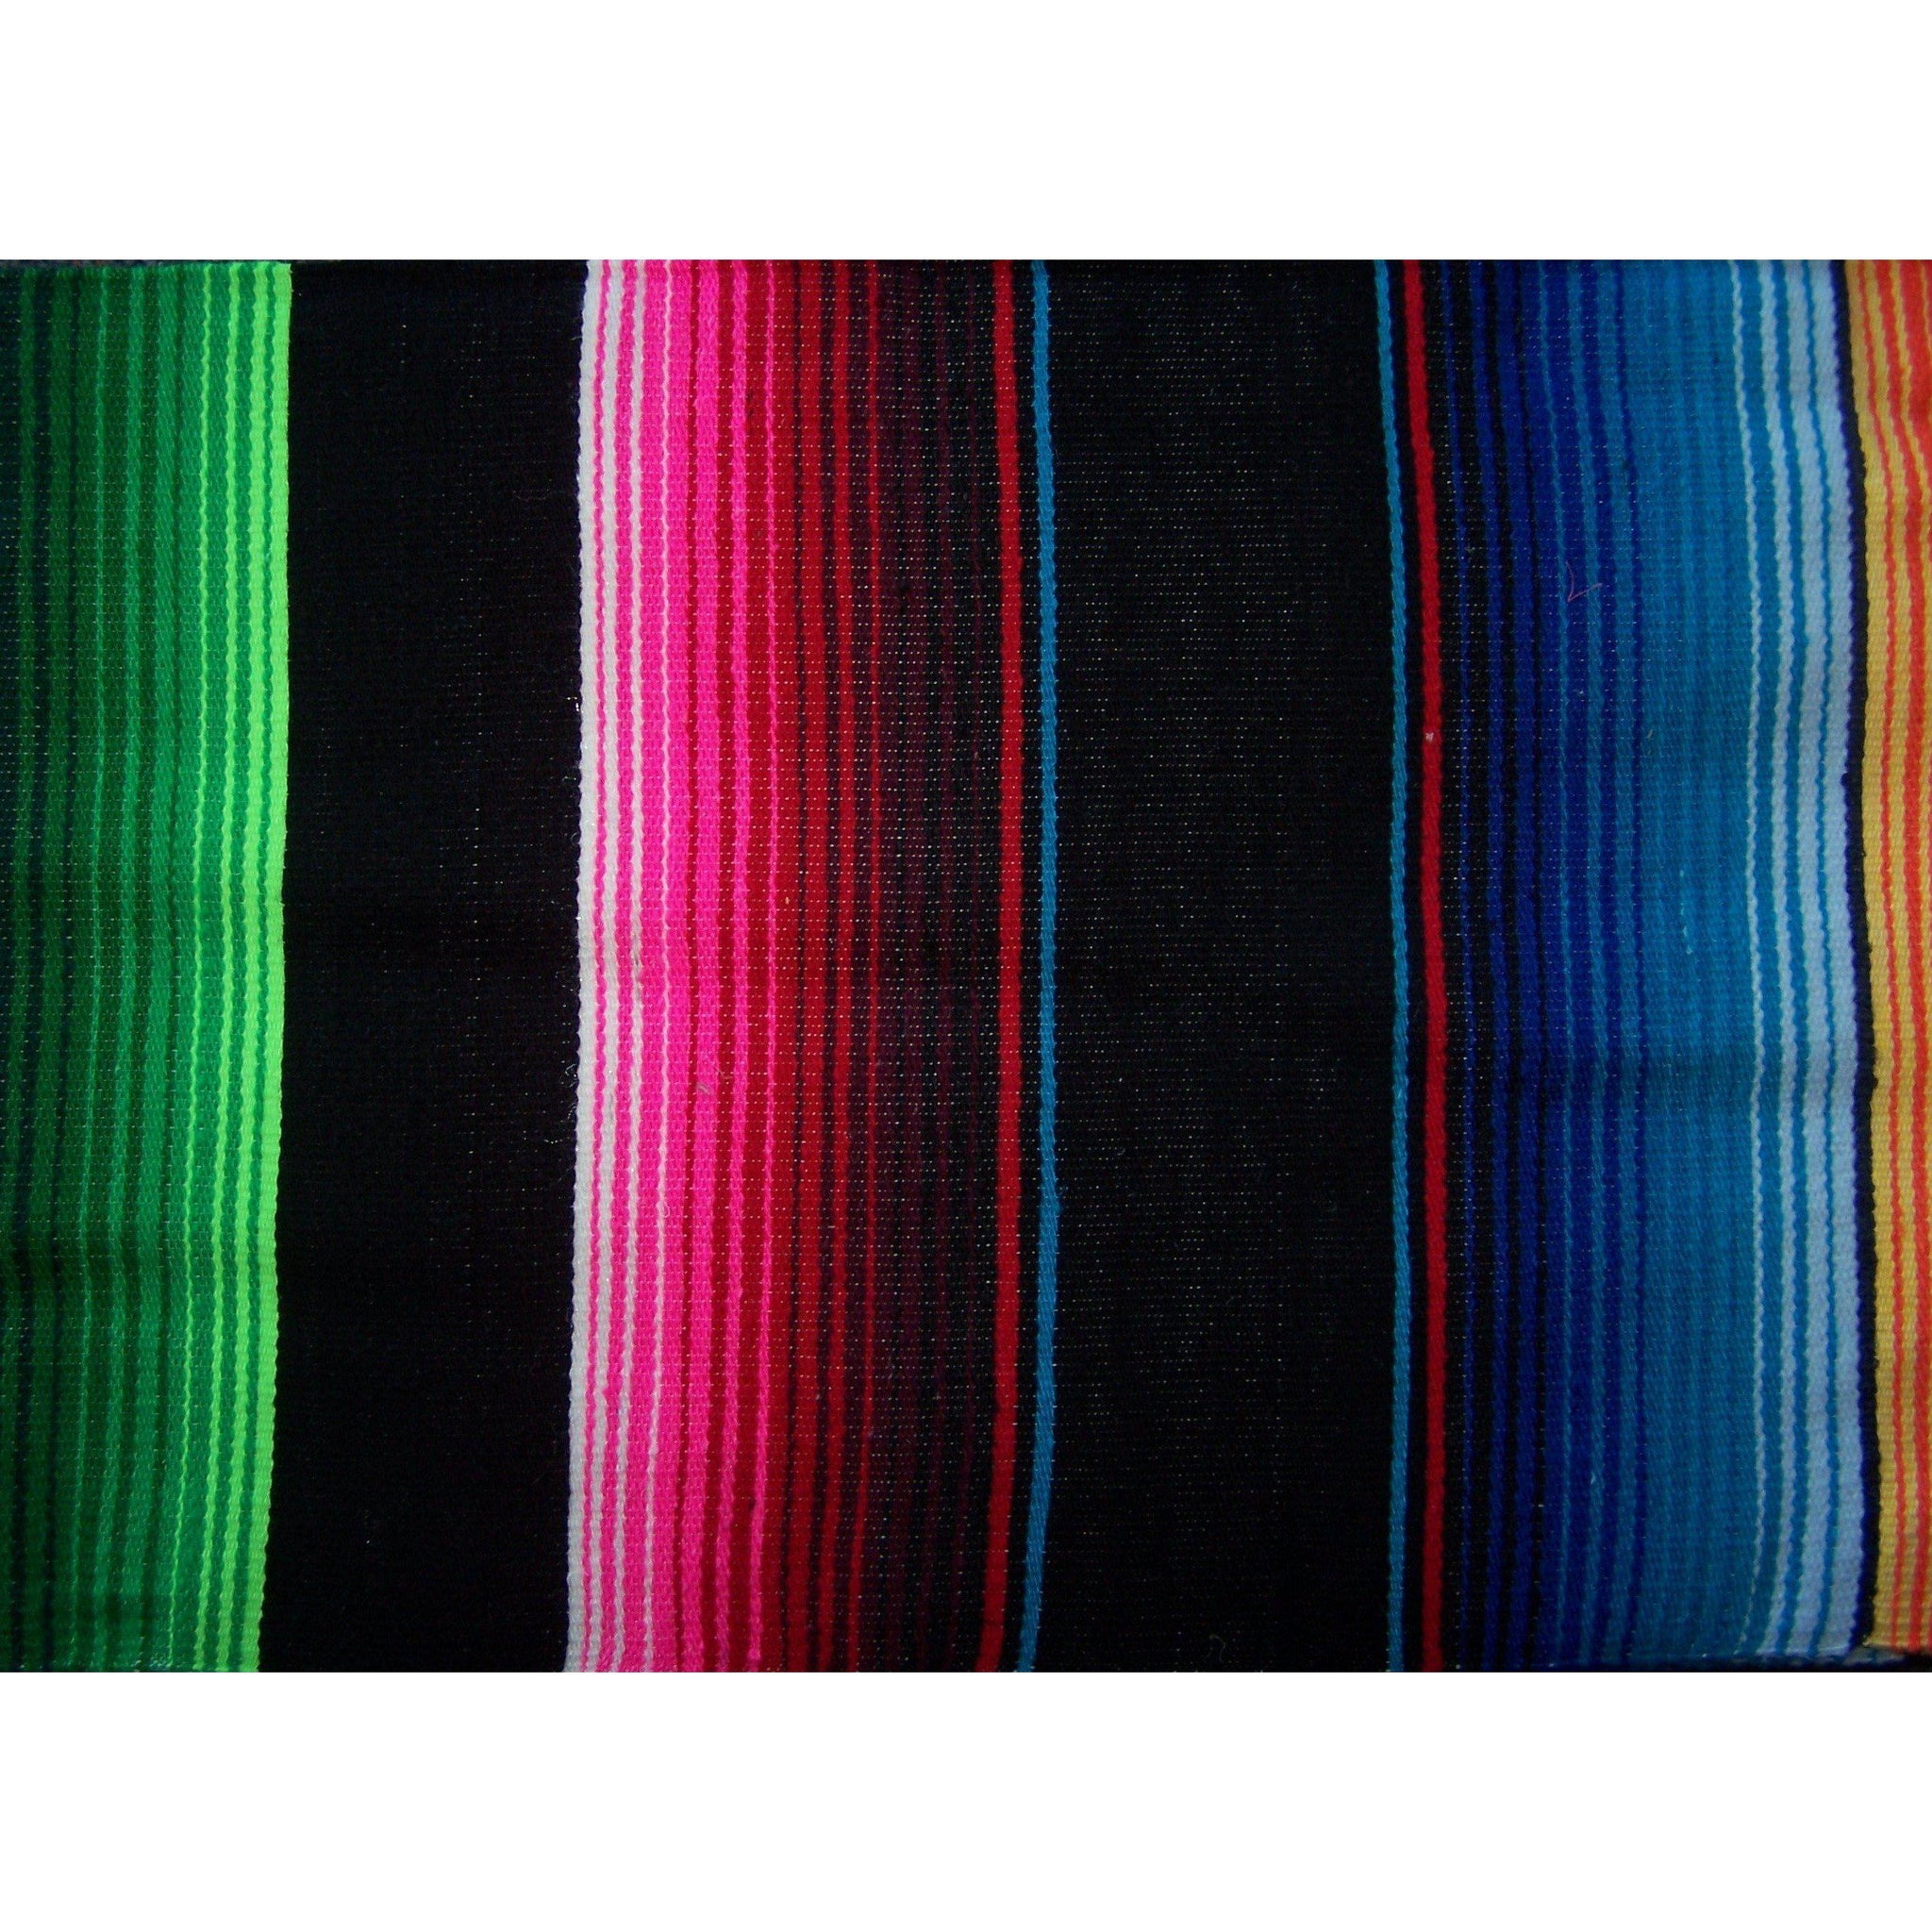 Black Mexican Sarape Blanket - Colours of Mexico